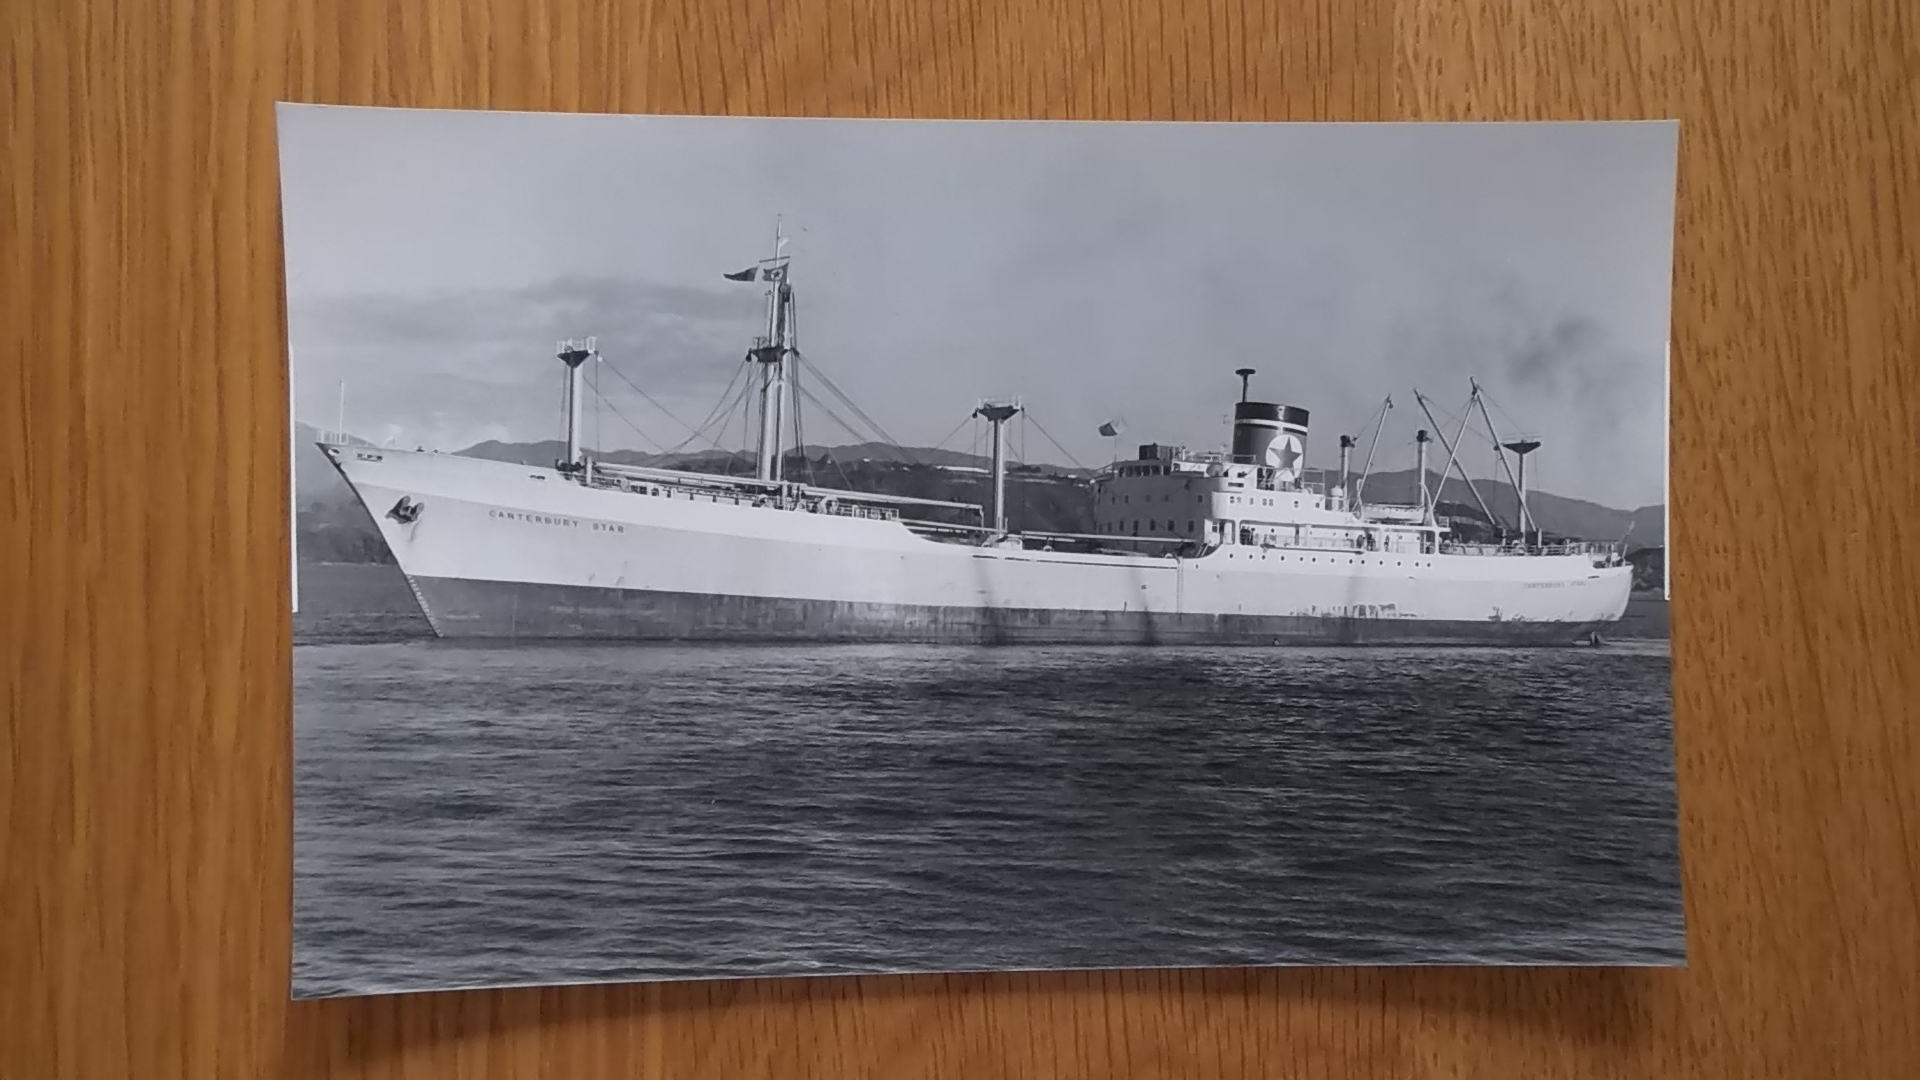 B/W PHOTOGRAPH OF THE VESSEL CANTERBURY STAR TAKEN EARLY ON IN HER HISTORY